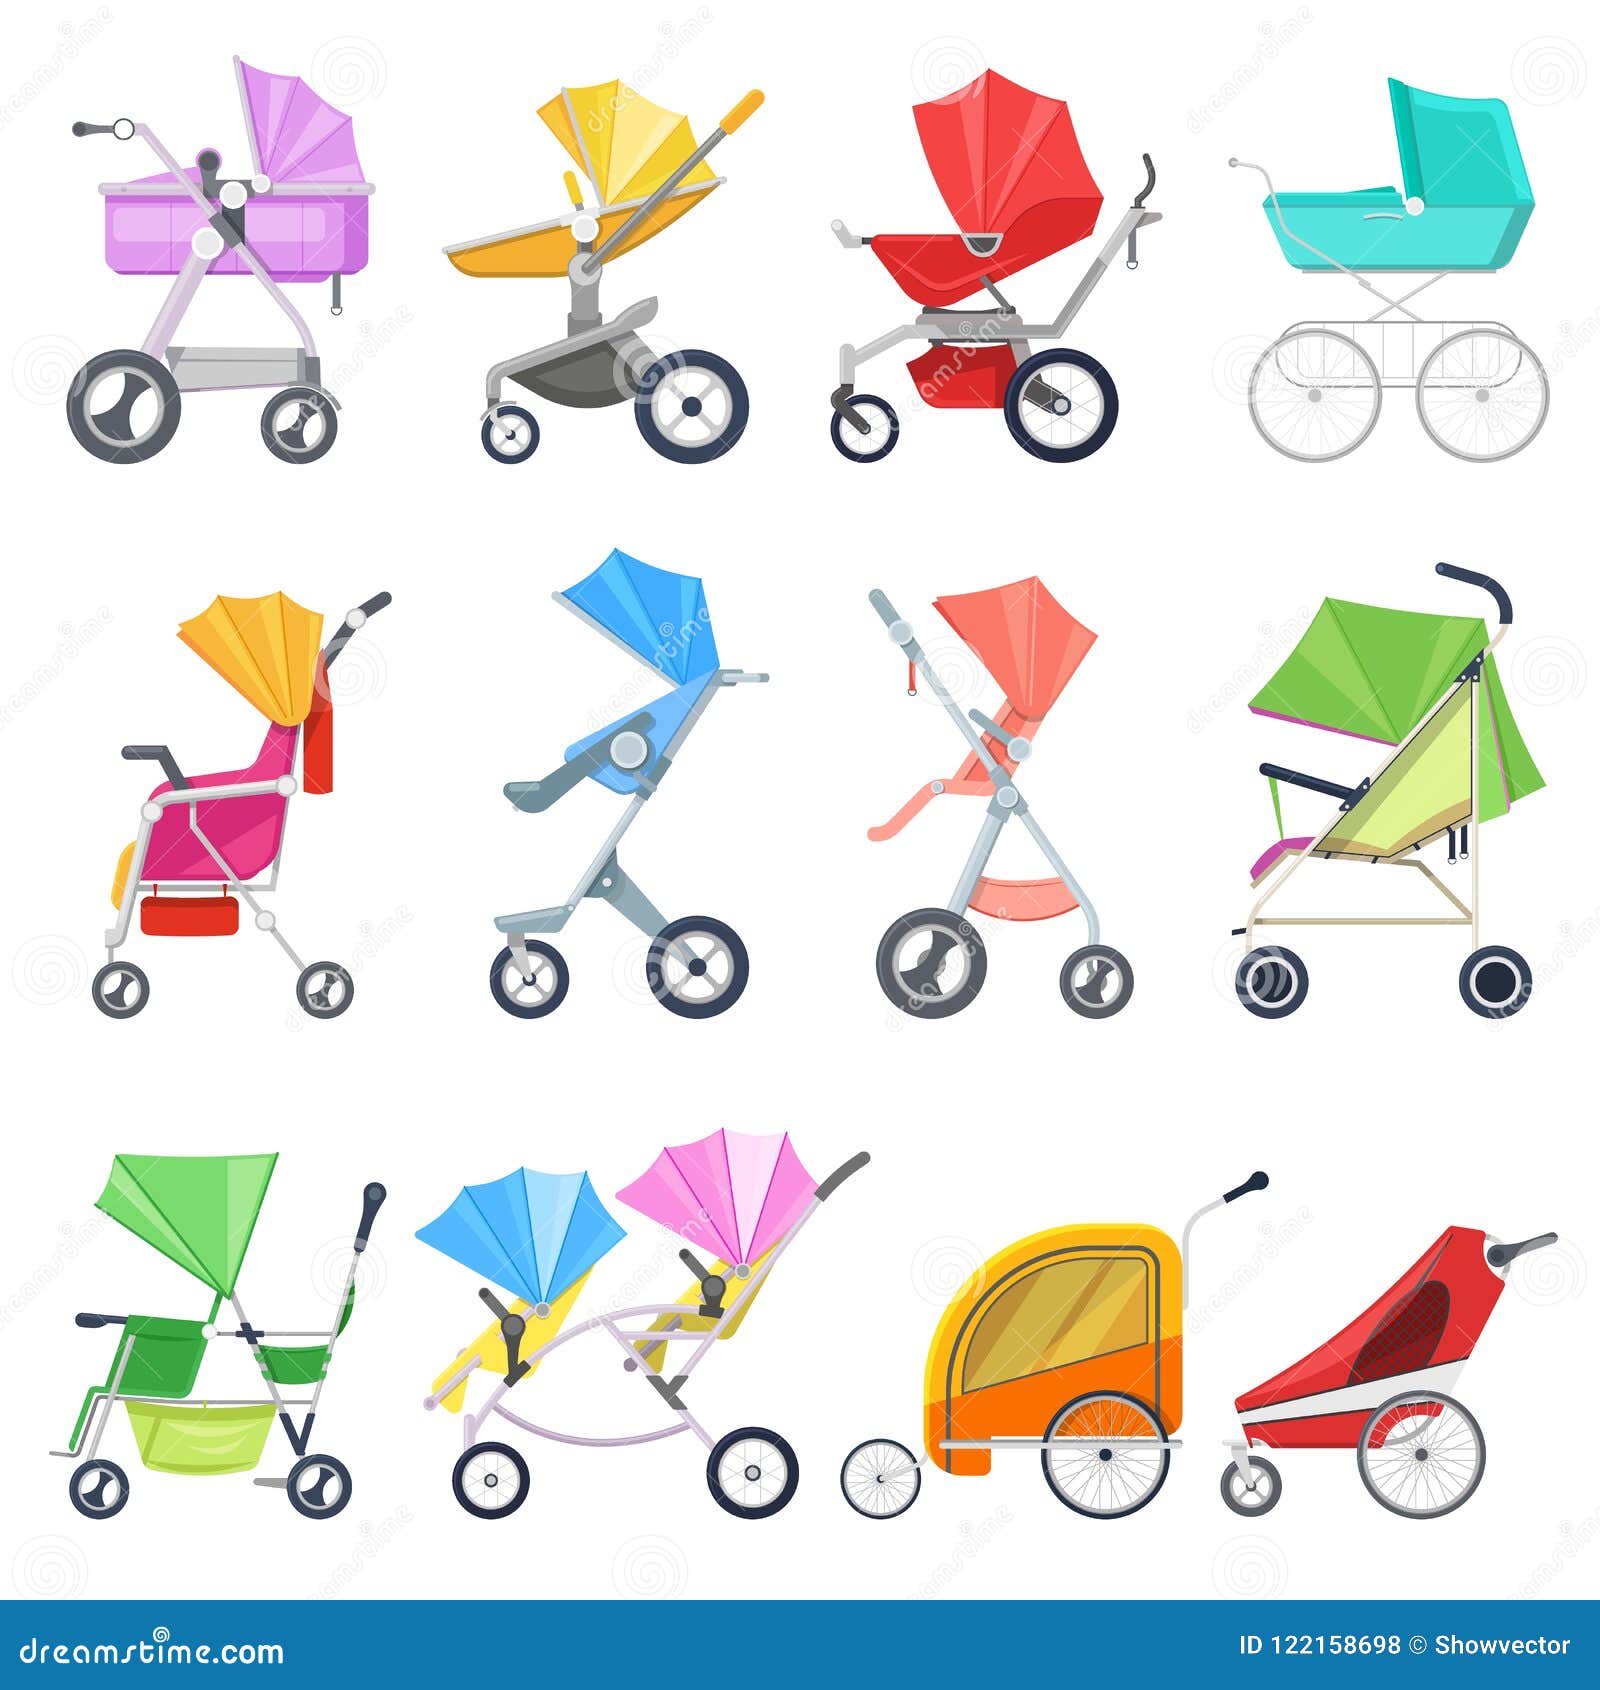 buggies and strollers from birth